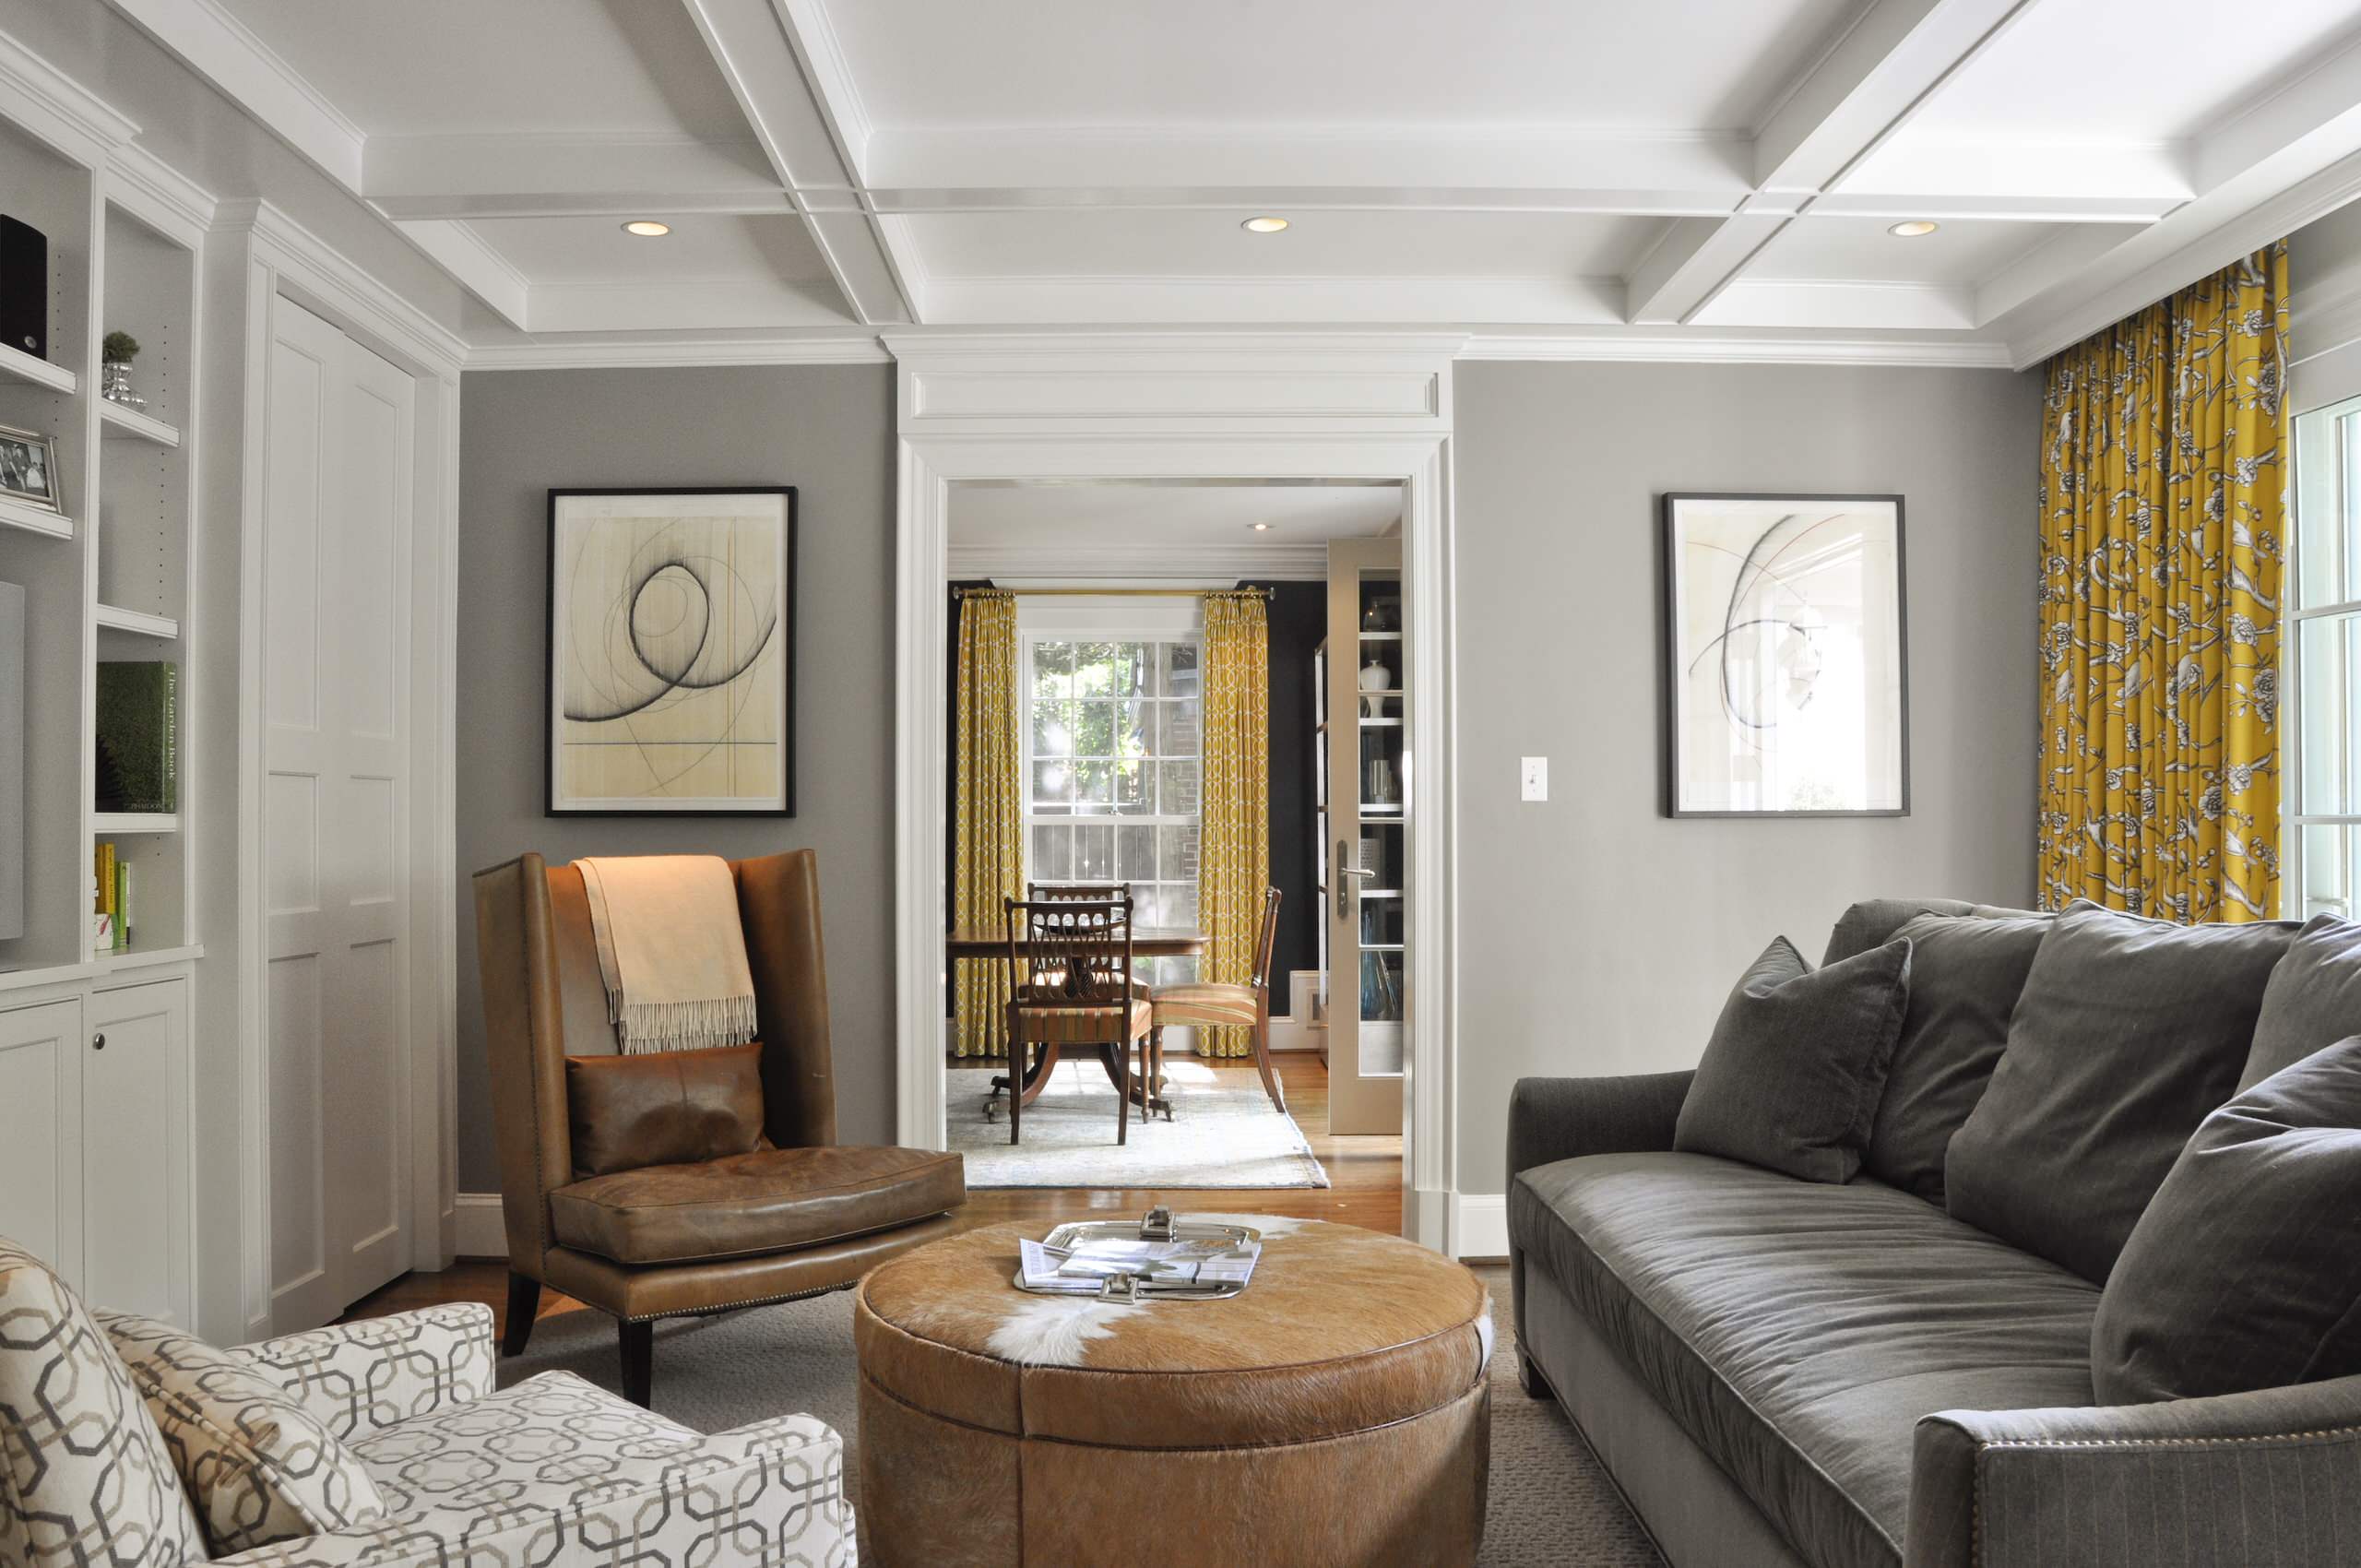 Brown Couch Gray Walls - Photos & Ideas | Houzz